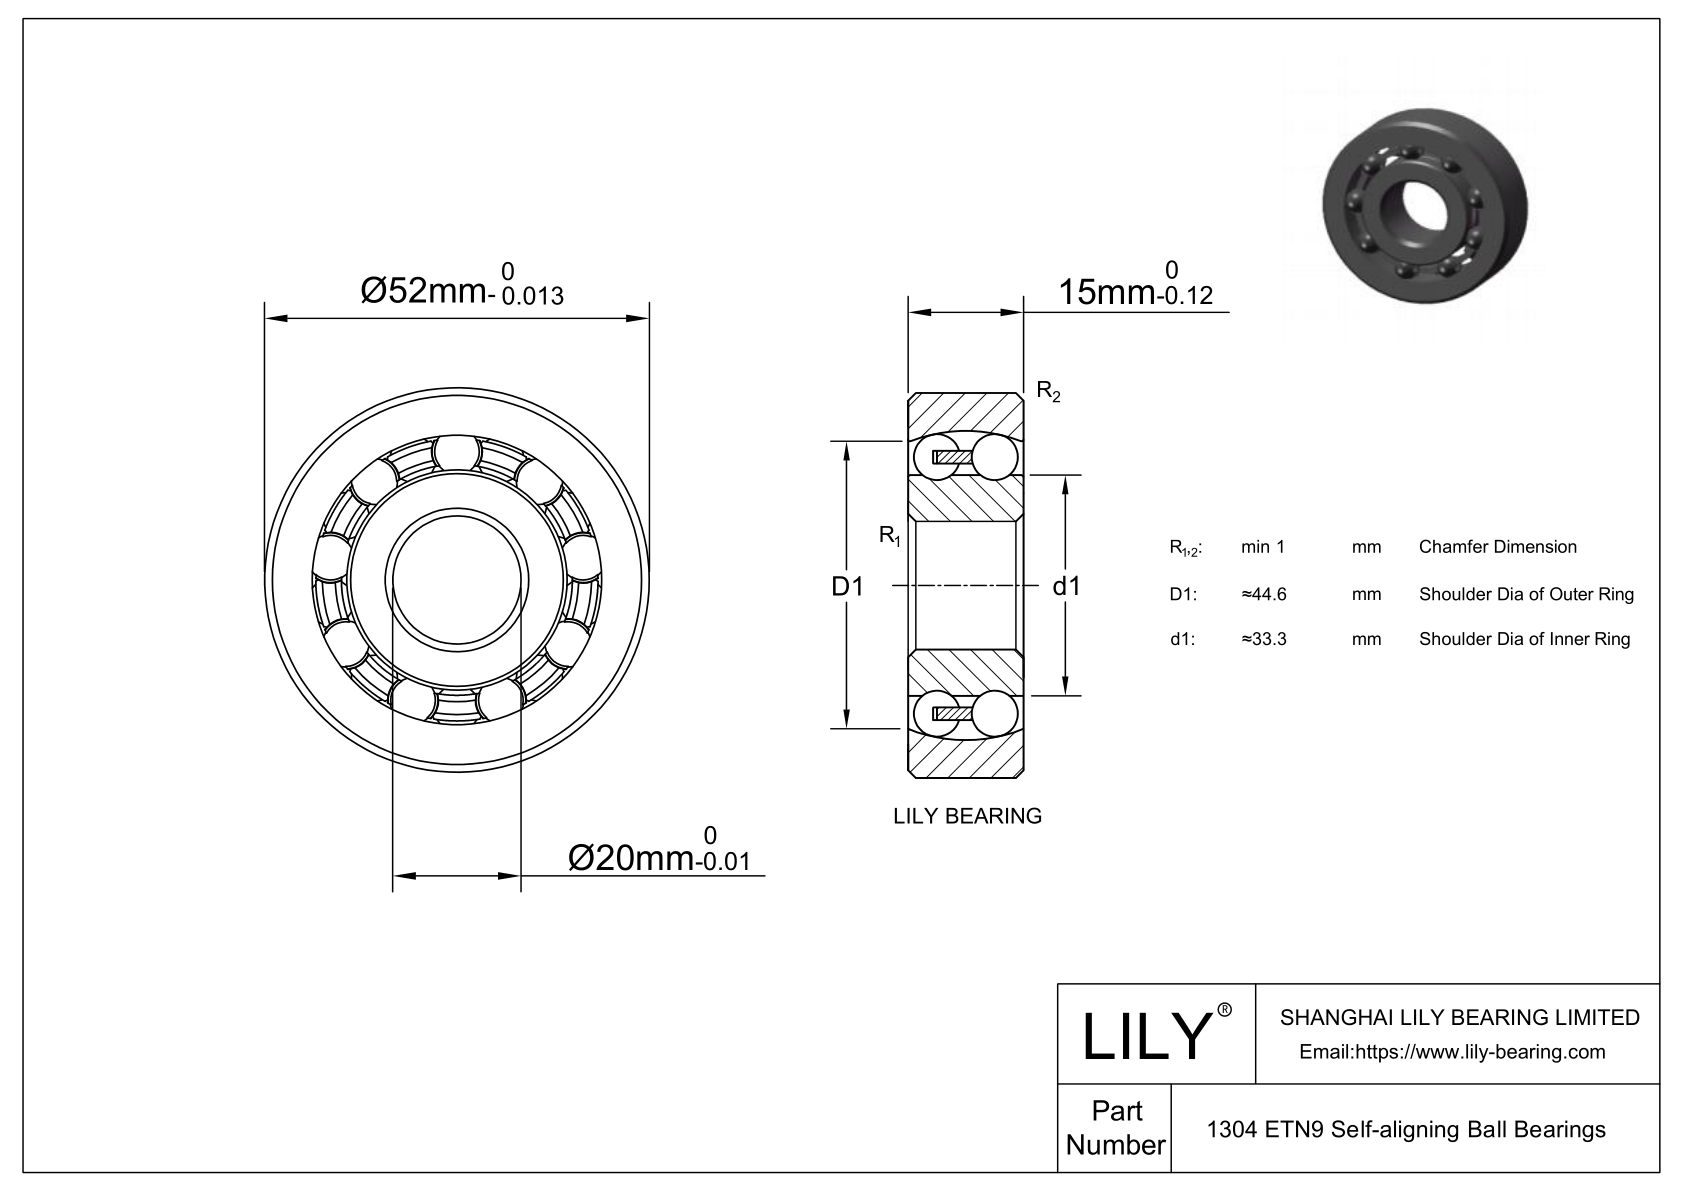 S1304 ETN9 Stainless Steel Self Aligning Ball Bearings cad drawing